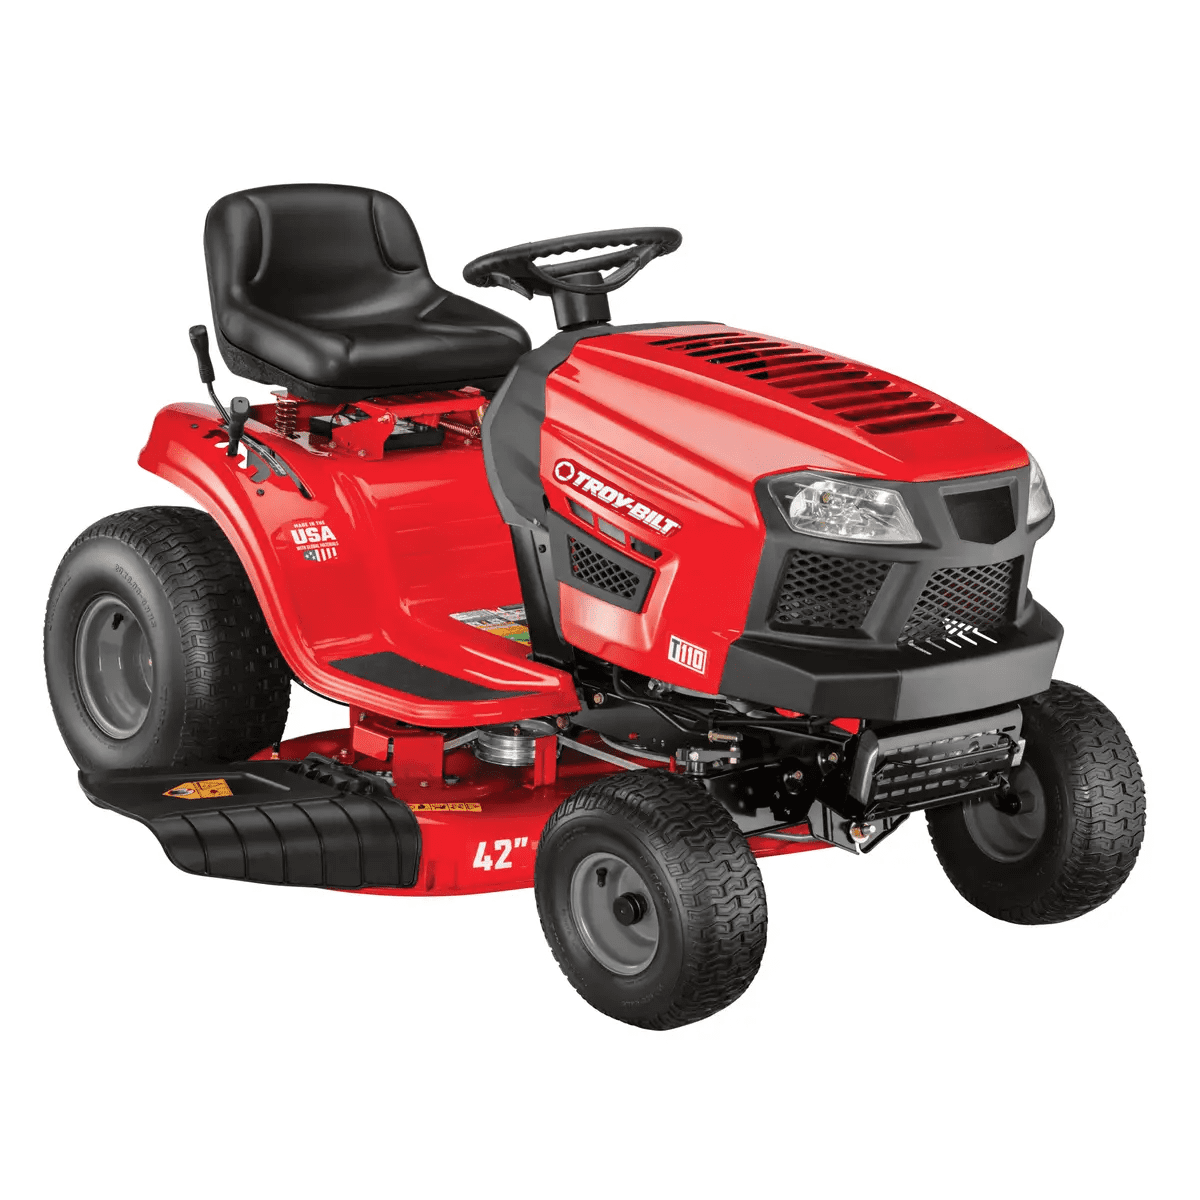 Image of Craftsman 42-Inch Riding Lawn Mower